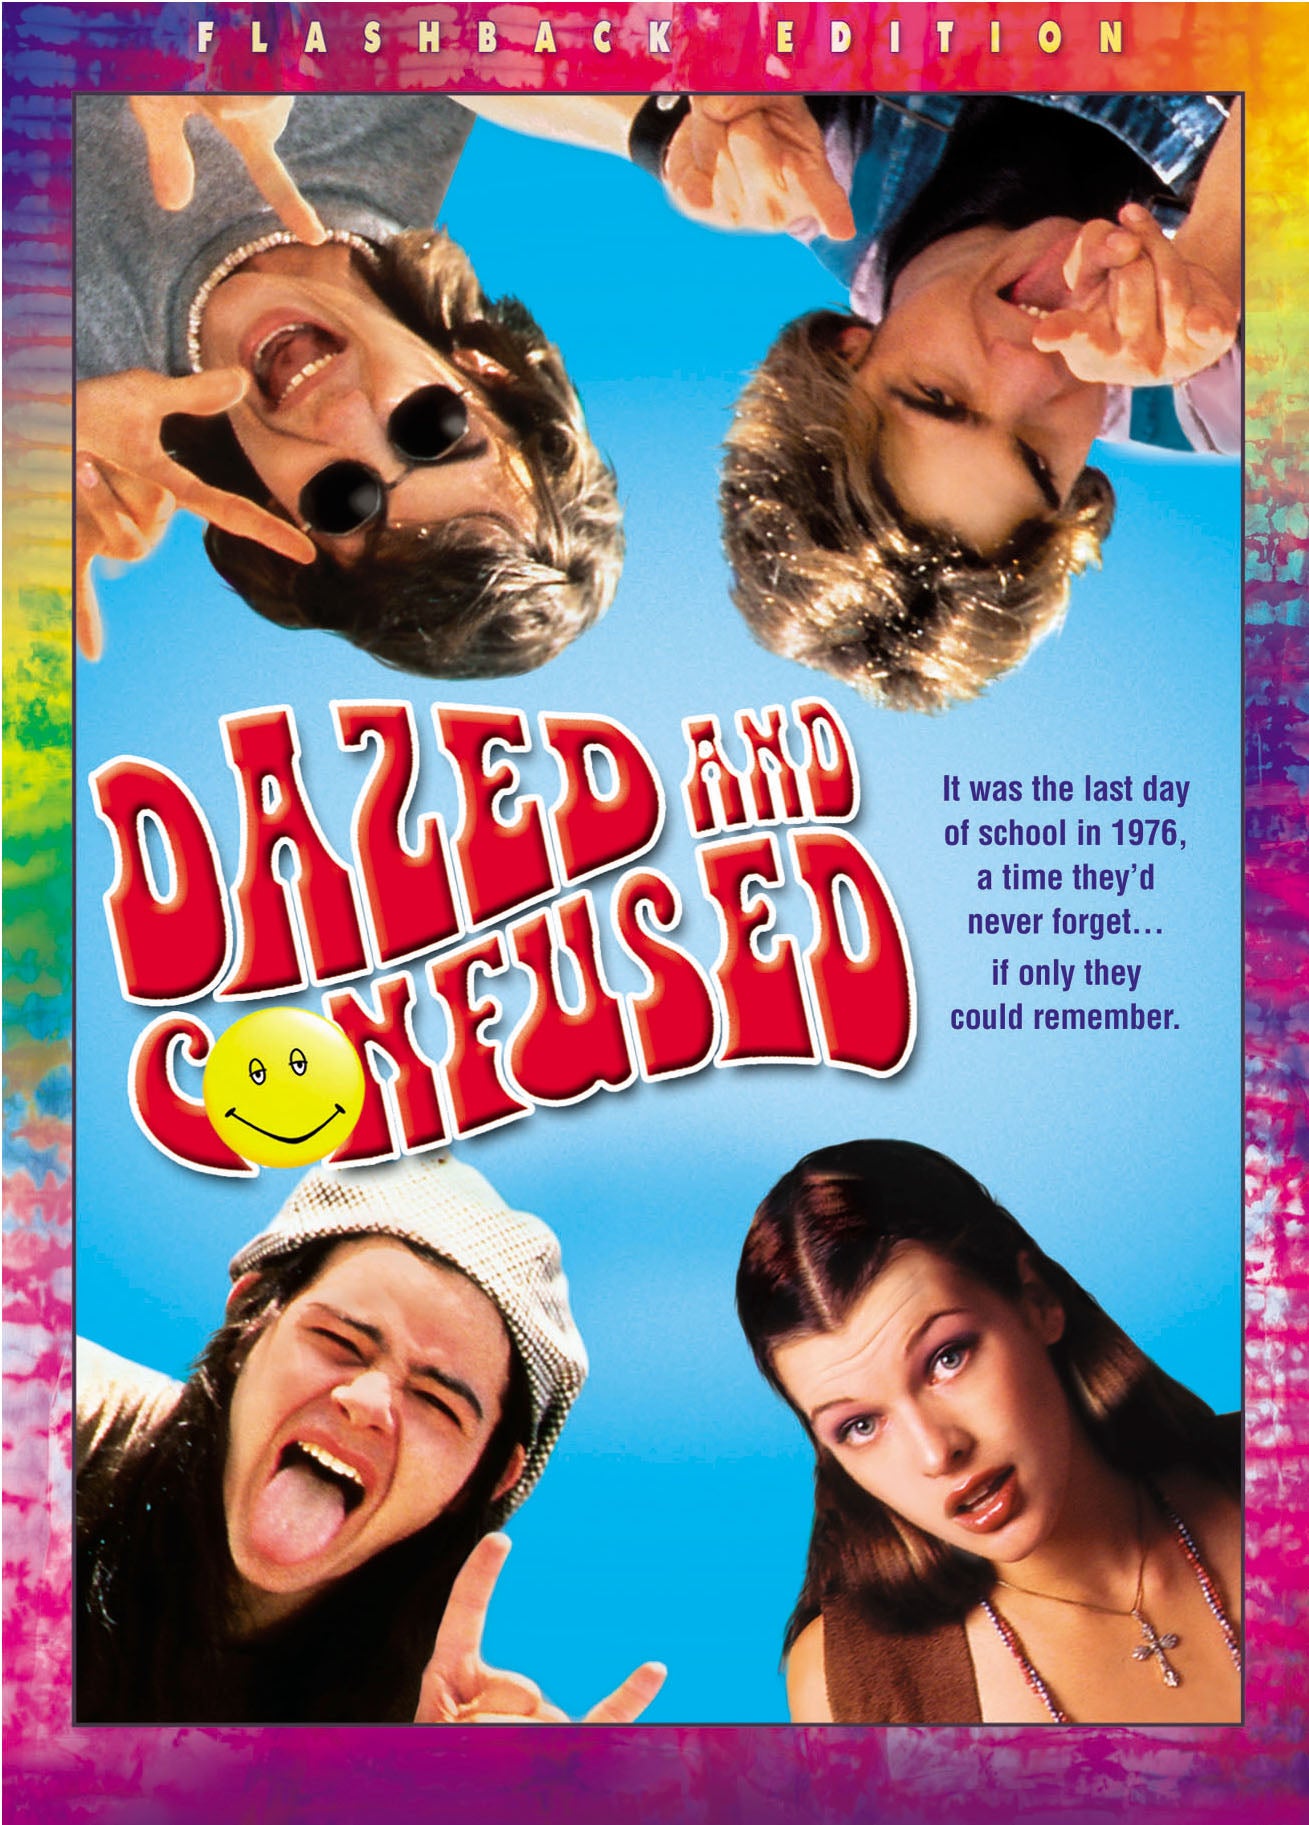 Dazed and Confused [WS] [Flashback Edition] cover art